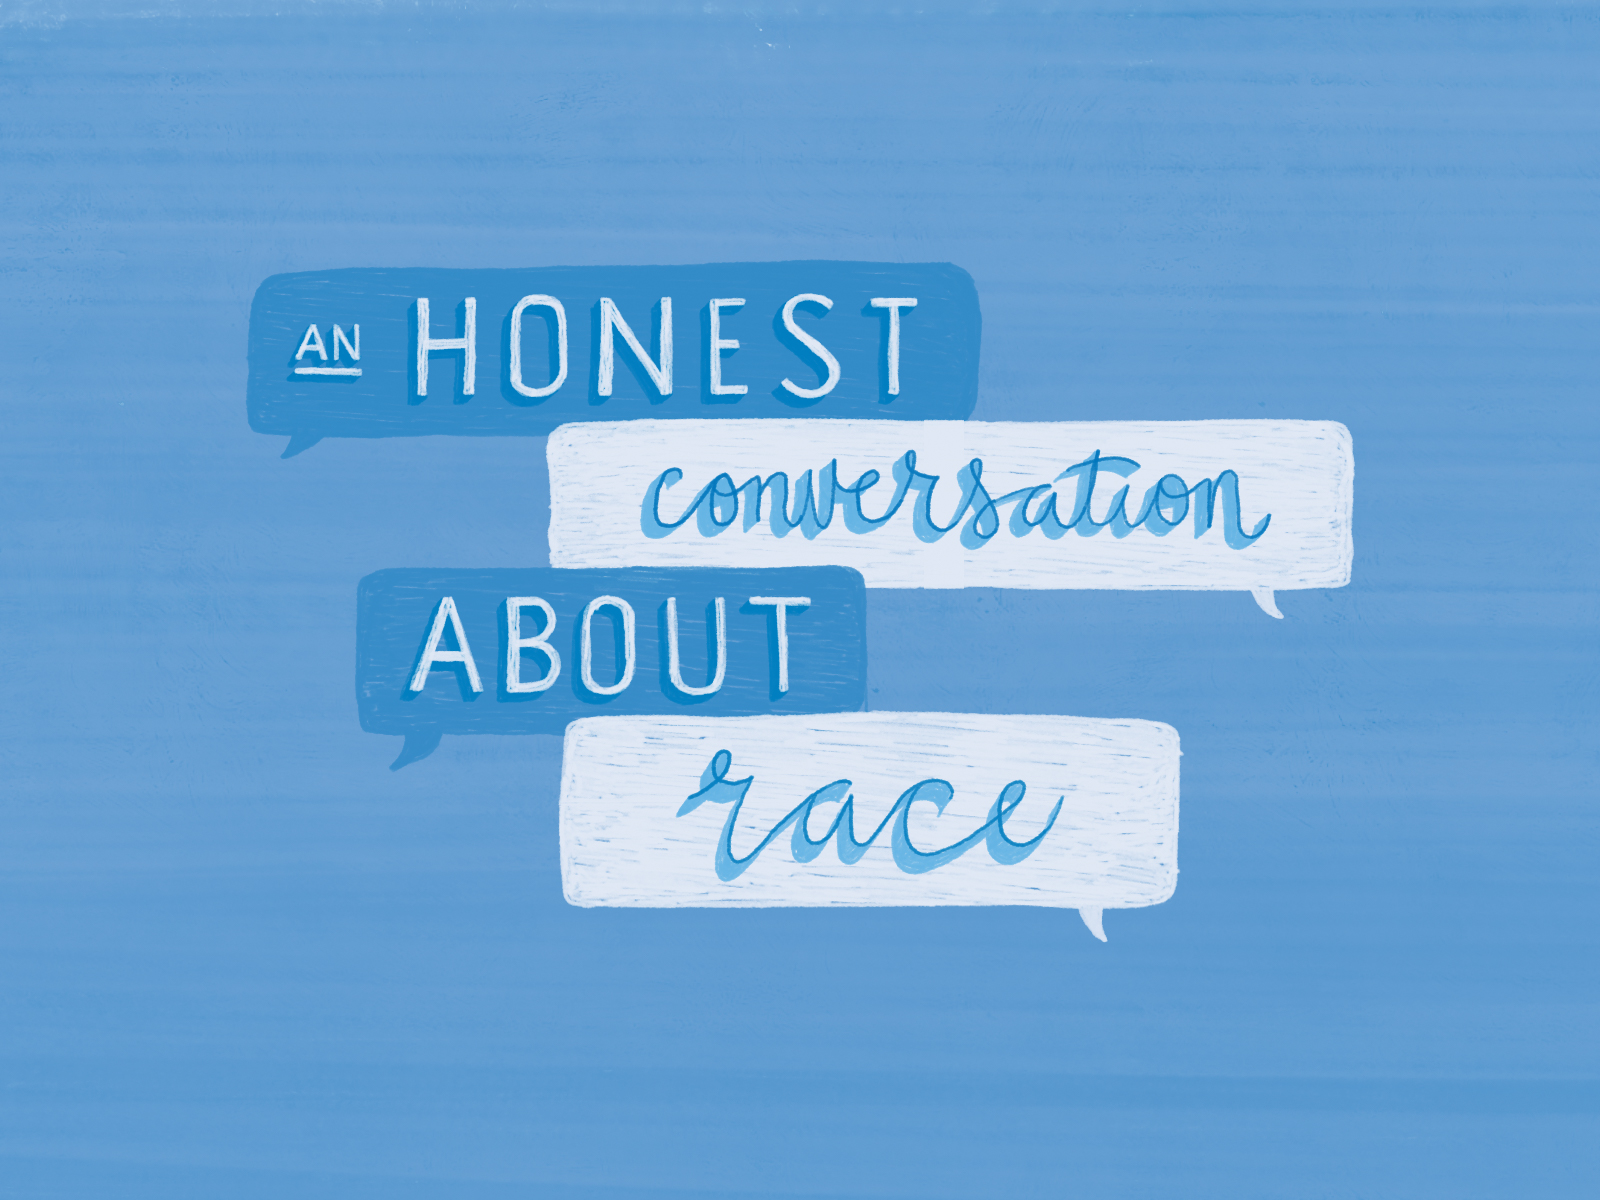 "An honest conversation about race" in hand lettering